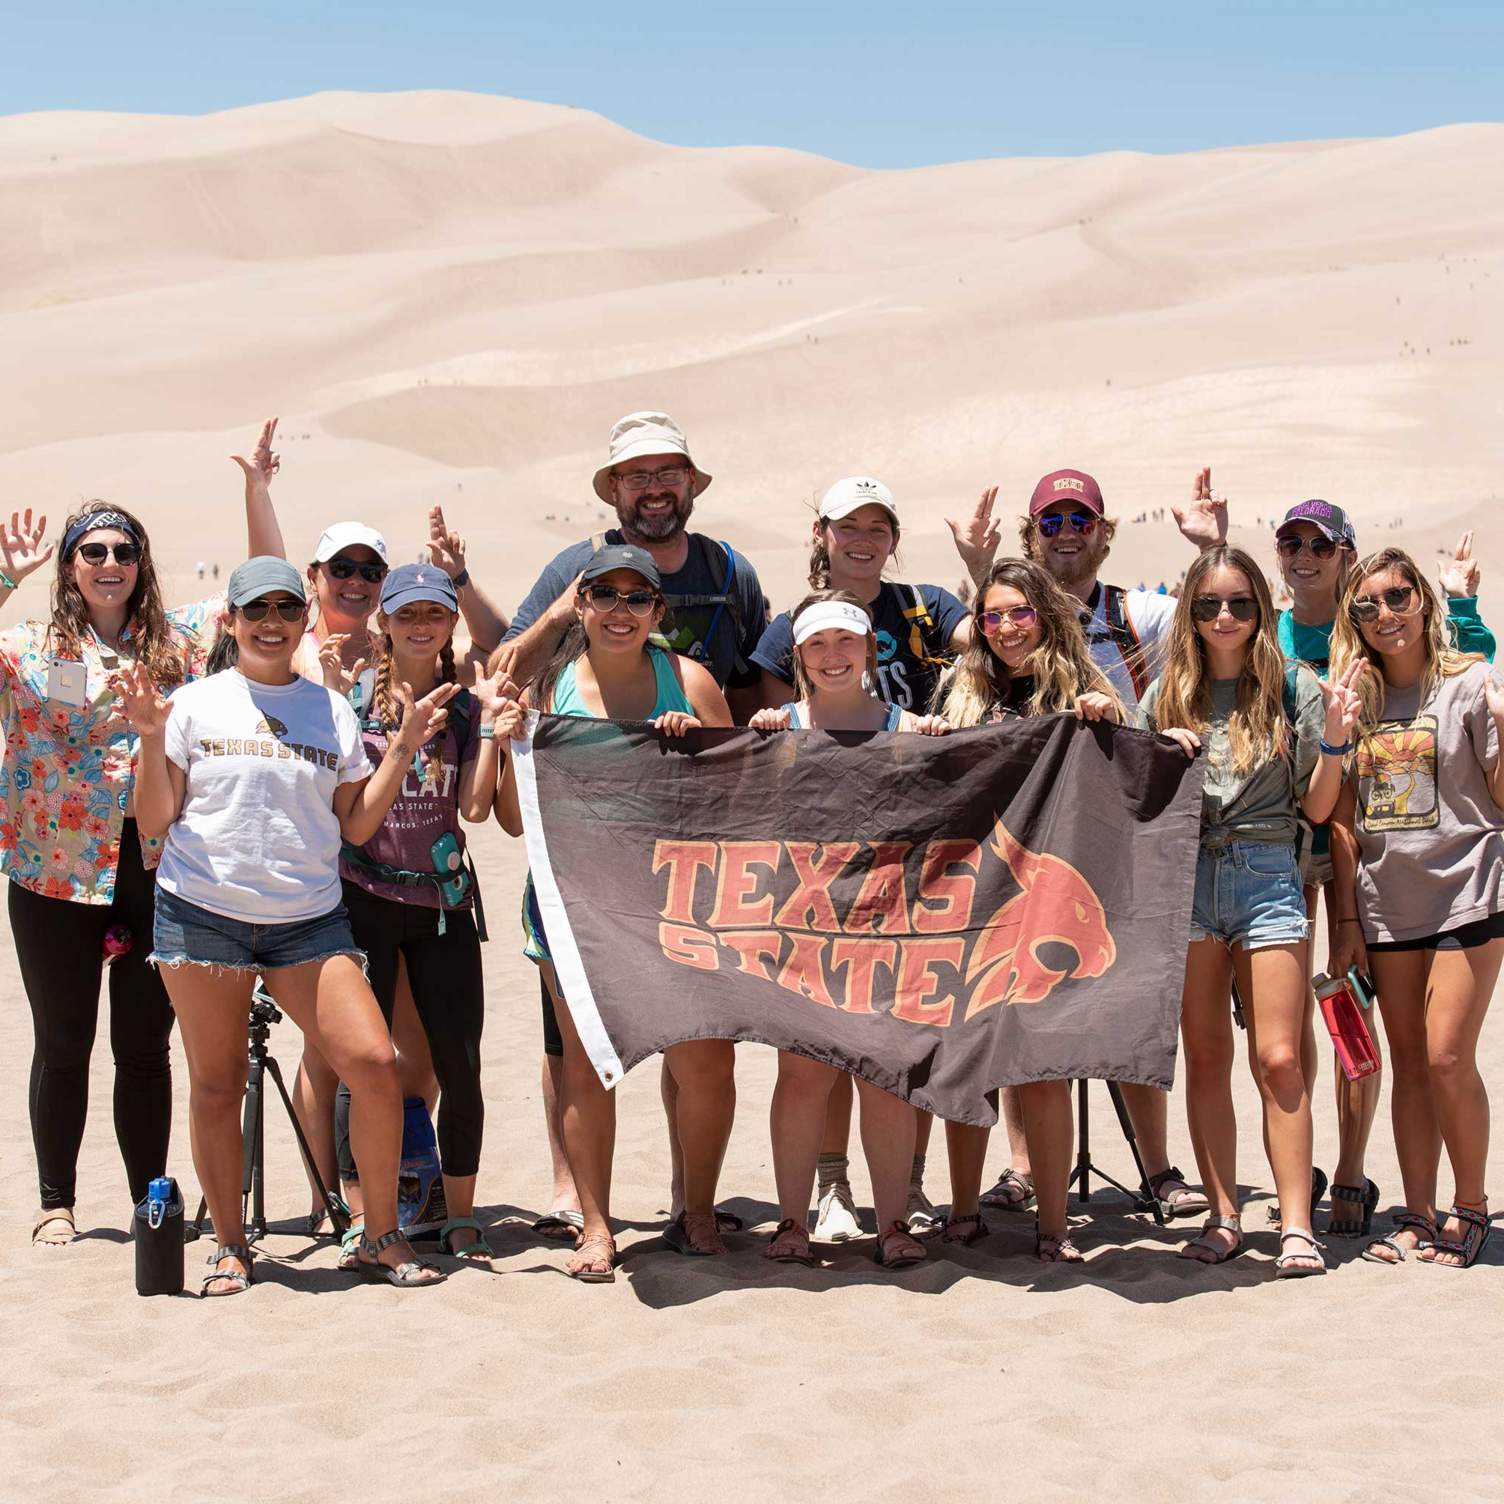 The group poses in front of the sand dunes